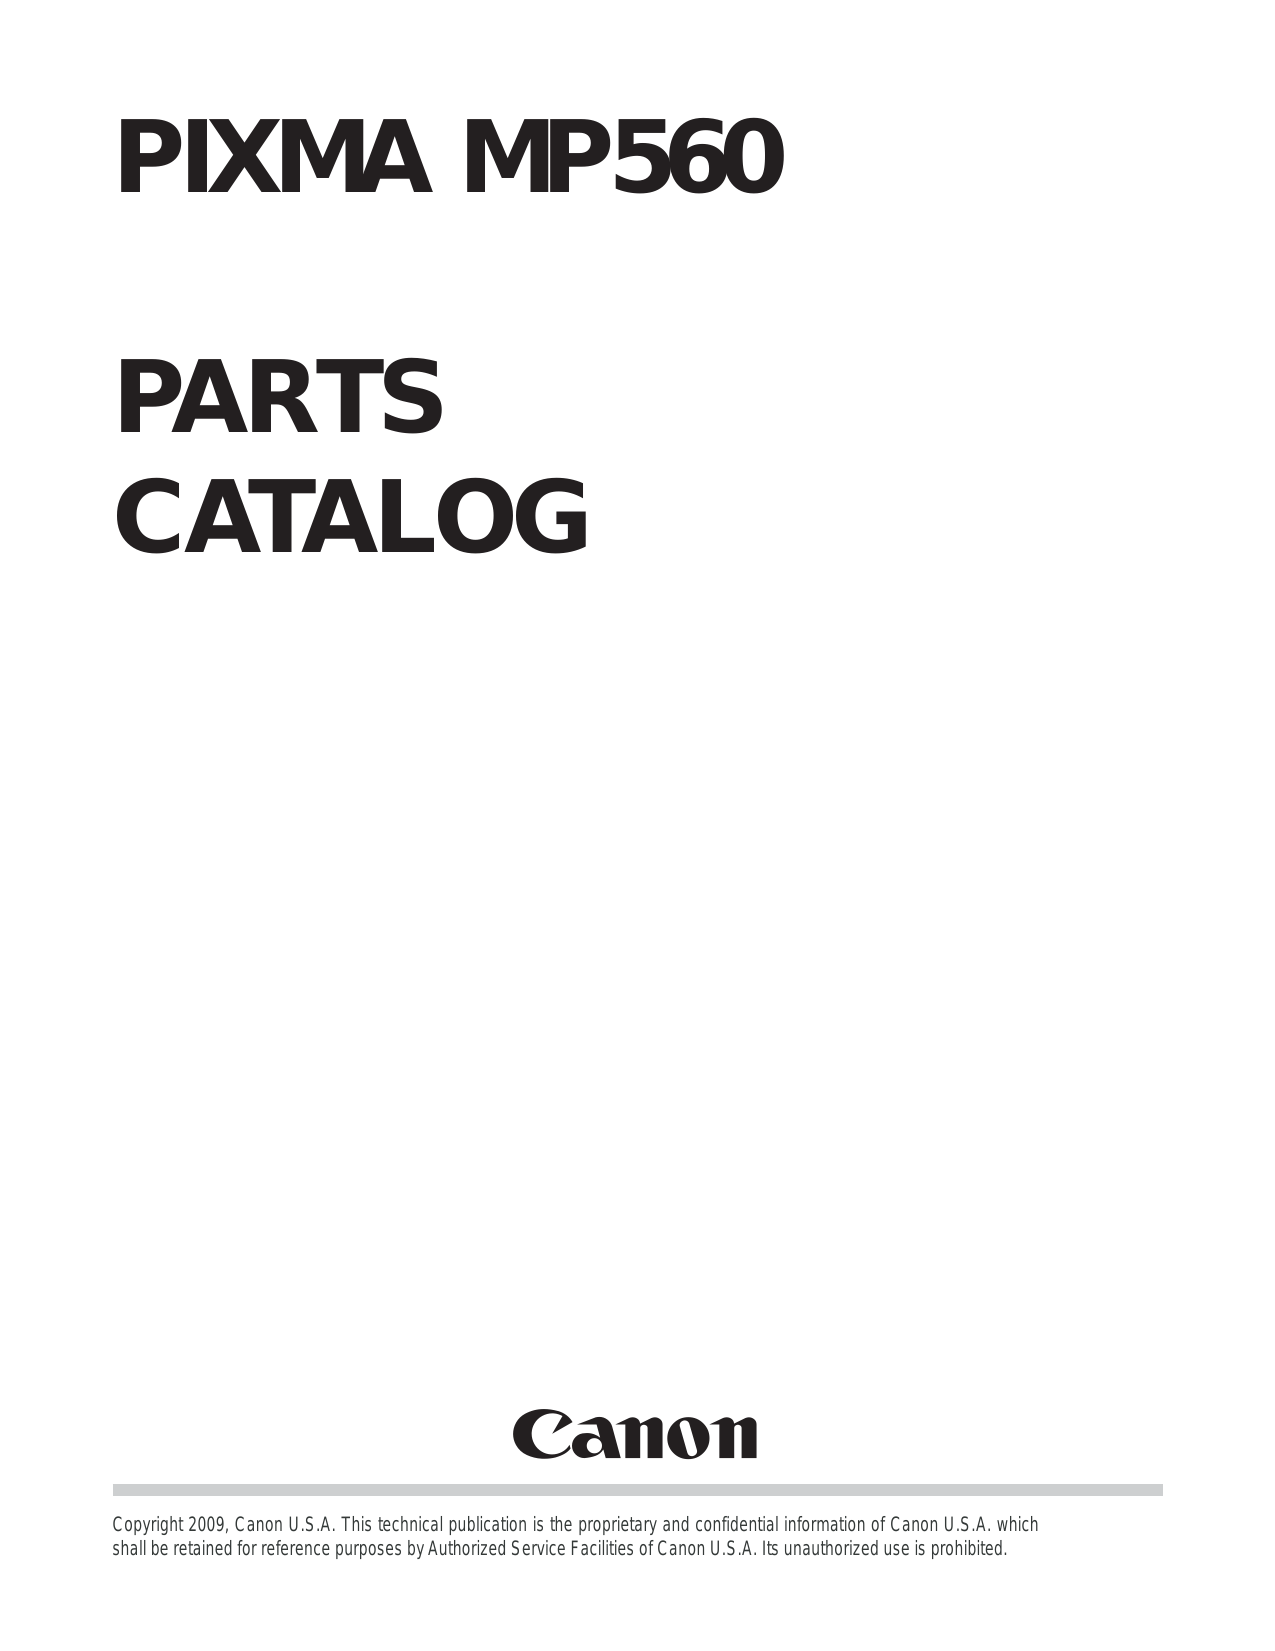 Canon Pixma MP560 all-in-one inkjet printer parts catalog Preview image 1